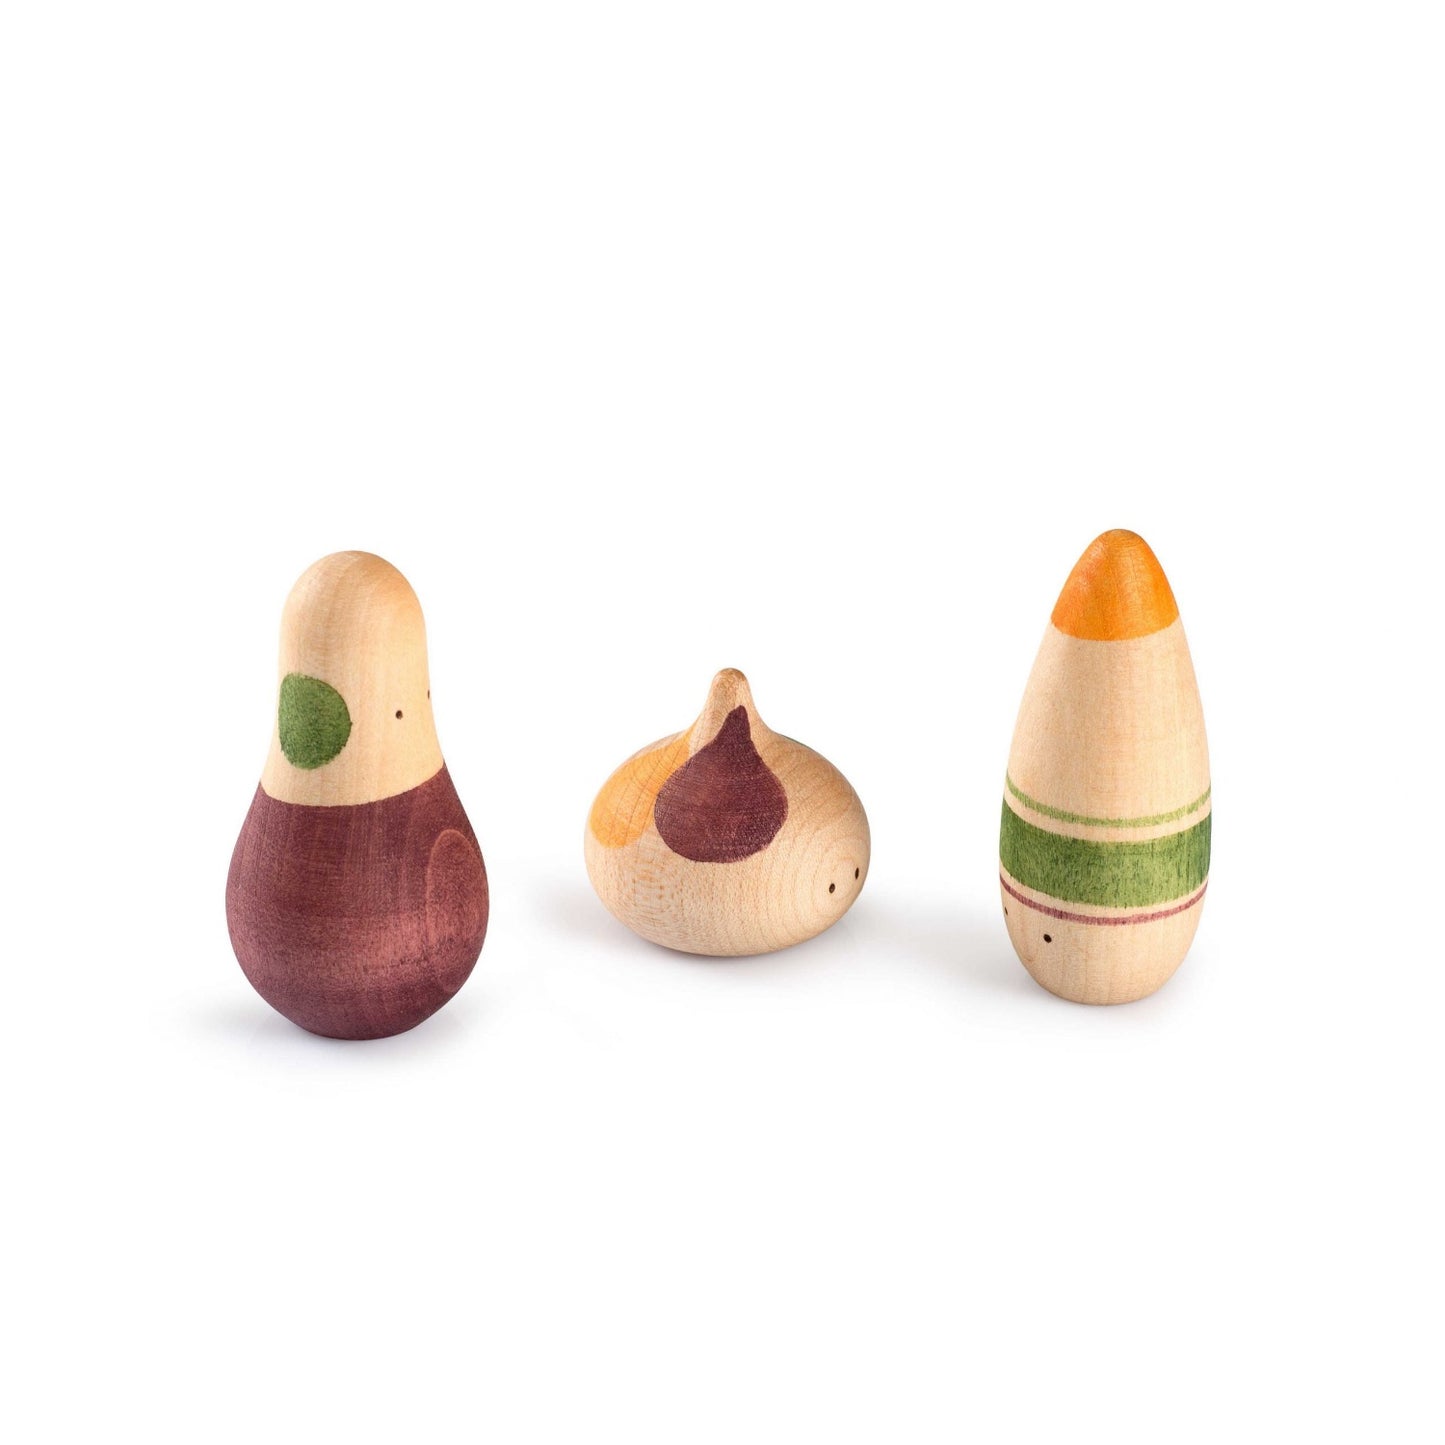 Ooh-lala! | 3 Wooden Figures for Kids | Open-Ended Play Set